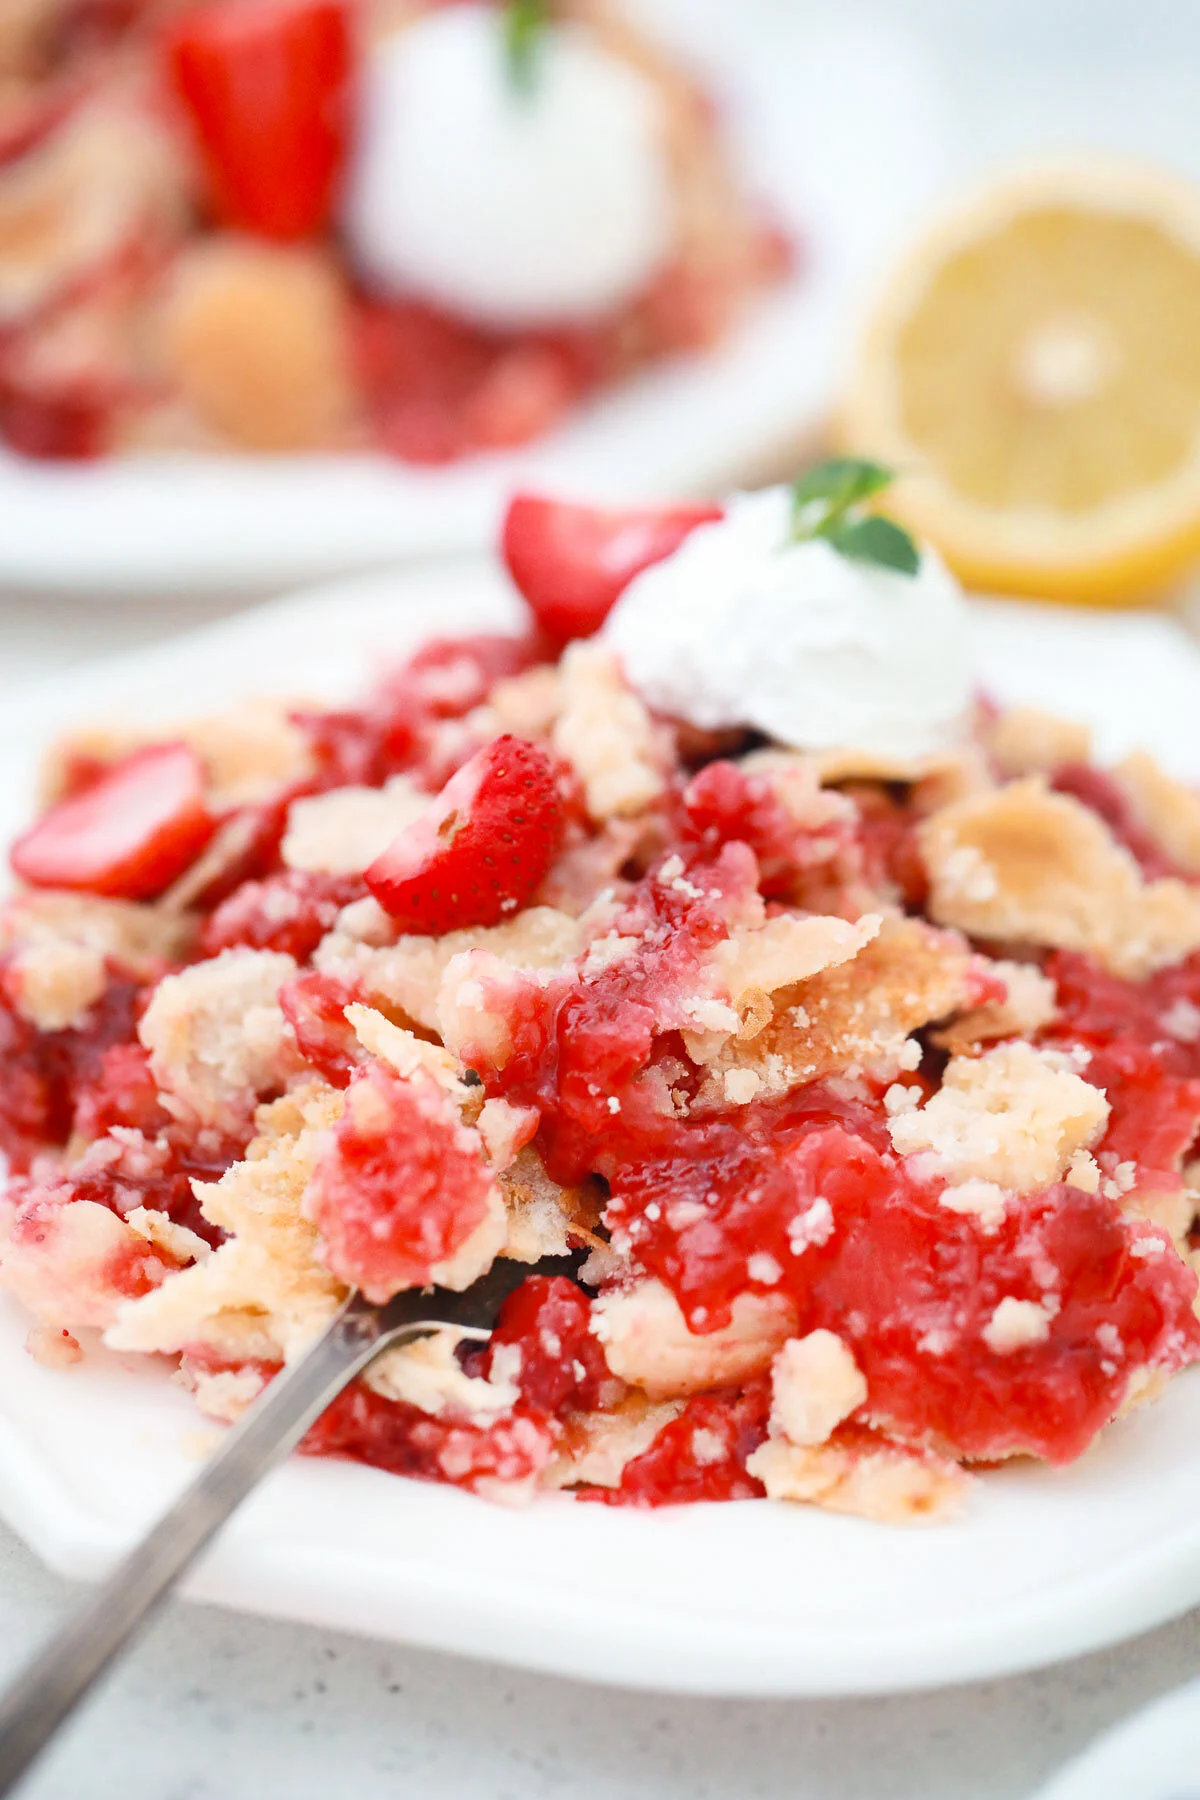 The easiest dump cake recipe you'll ever make. This strawberry dump cake is perfect for summer or any time of year!